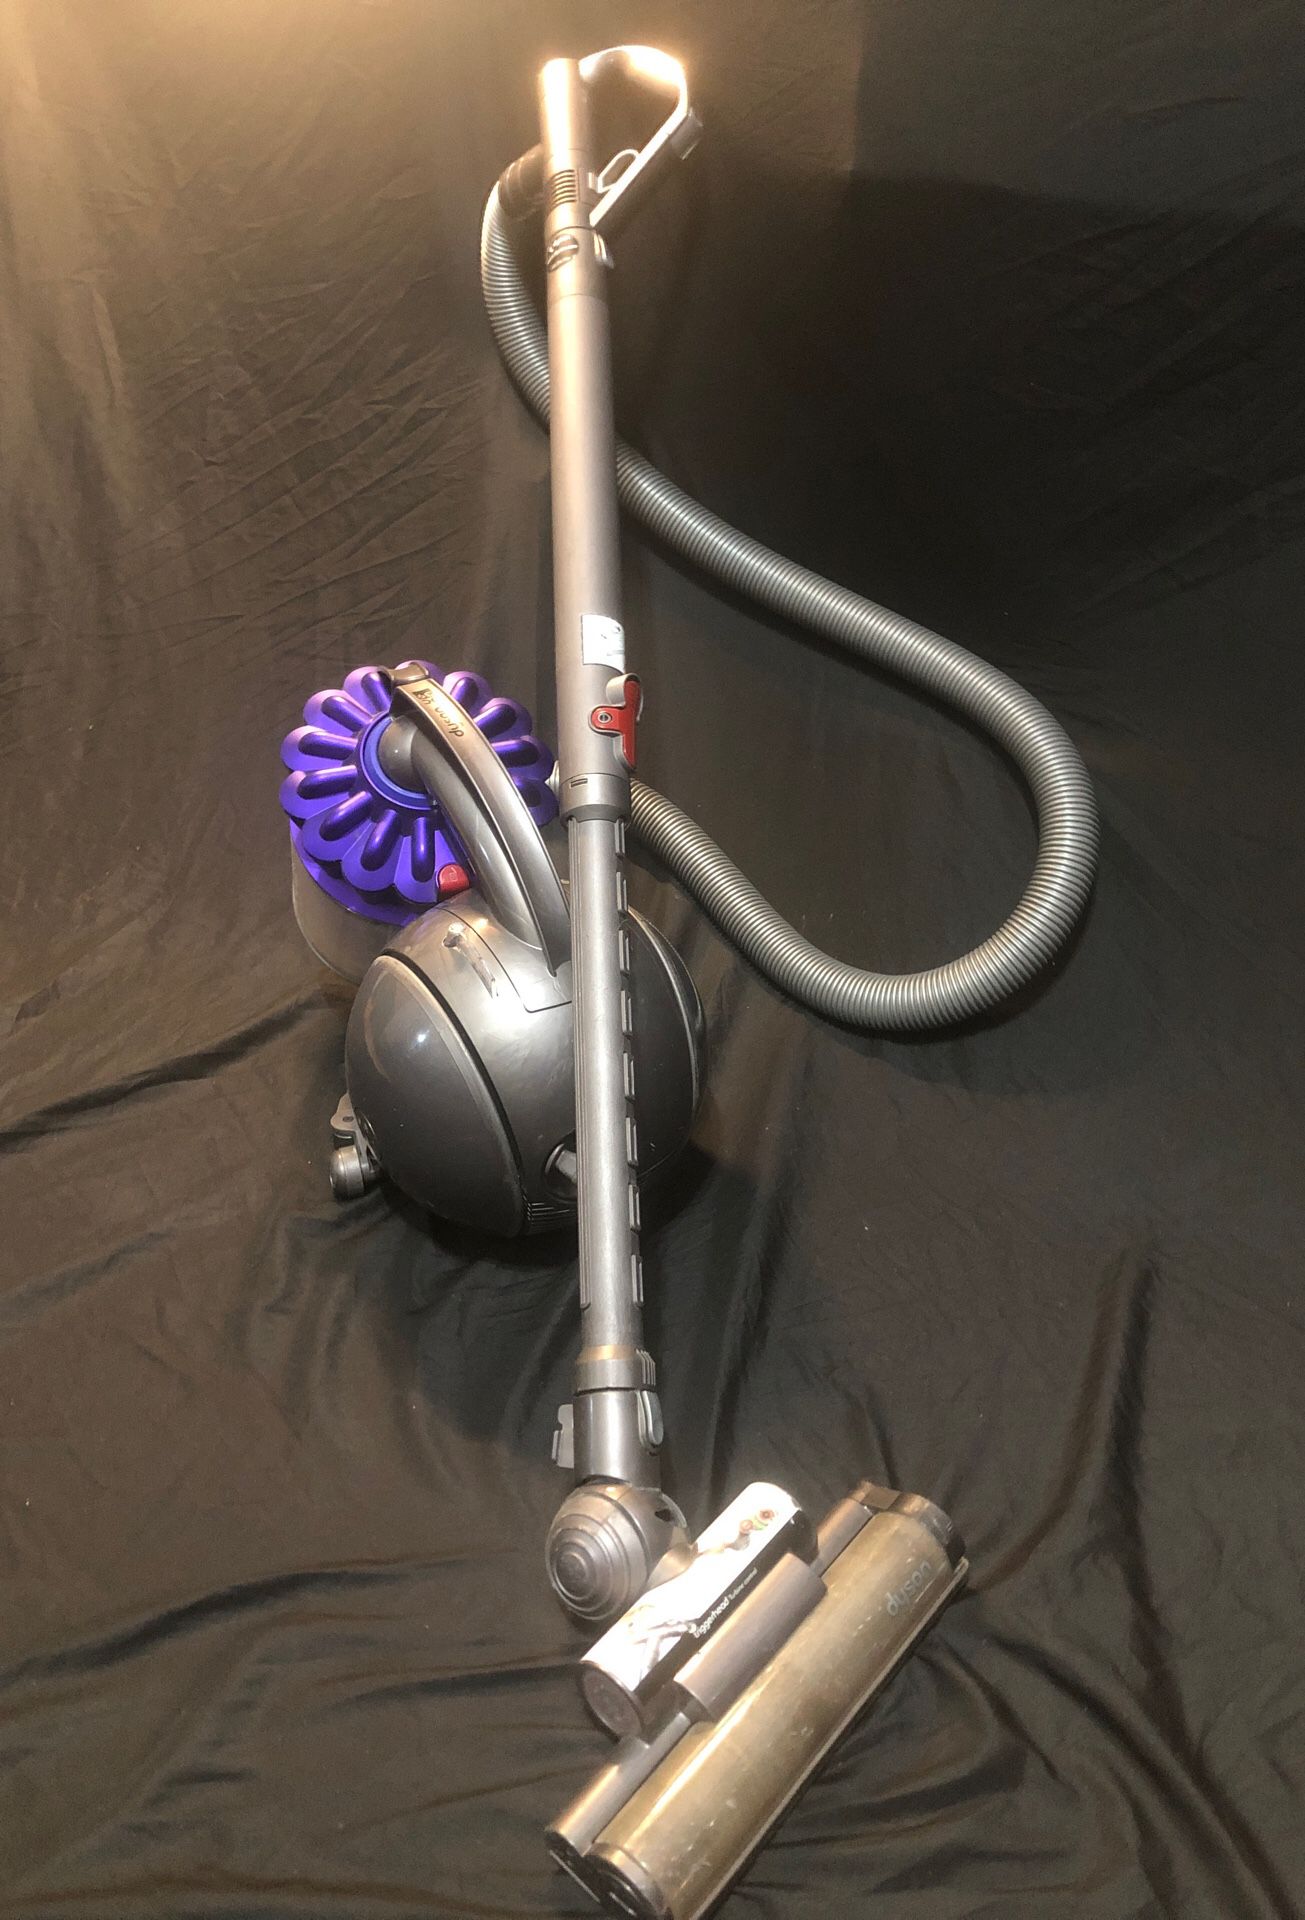 Dyson DC 39 Animal Canister Vacuum Cleaner